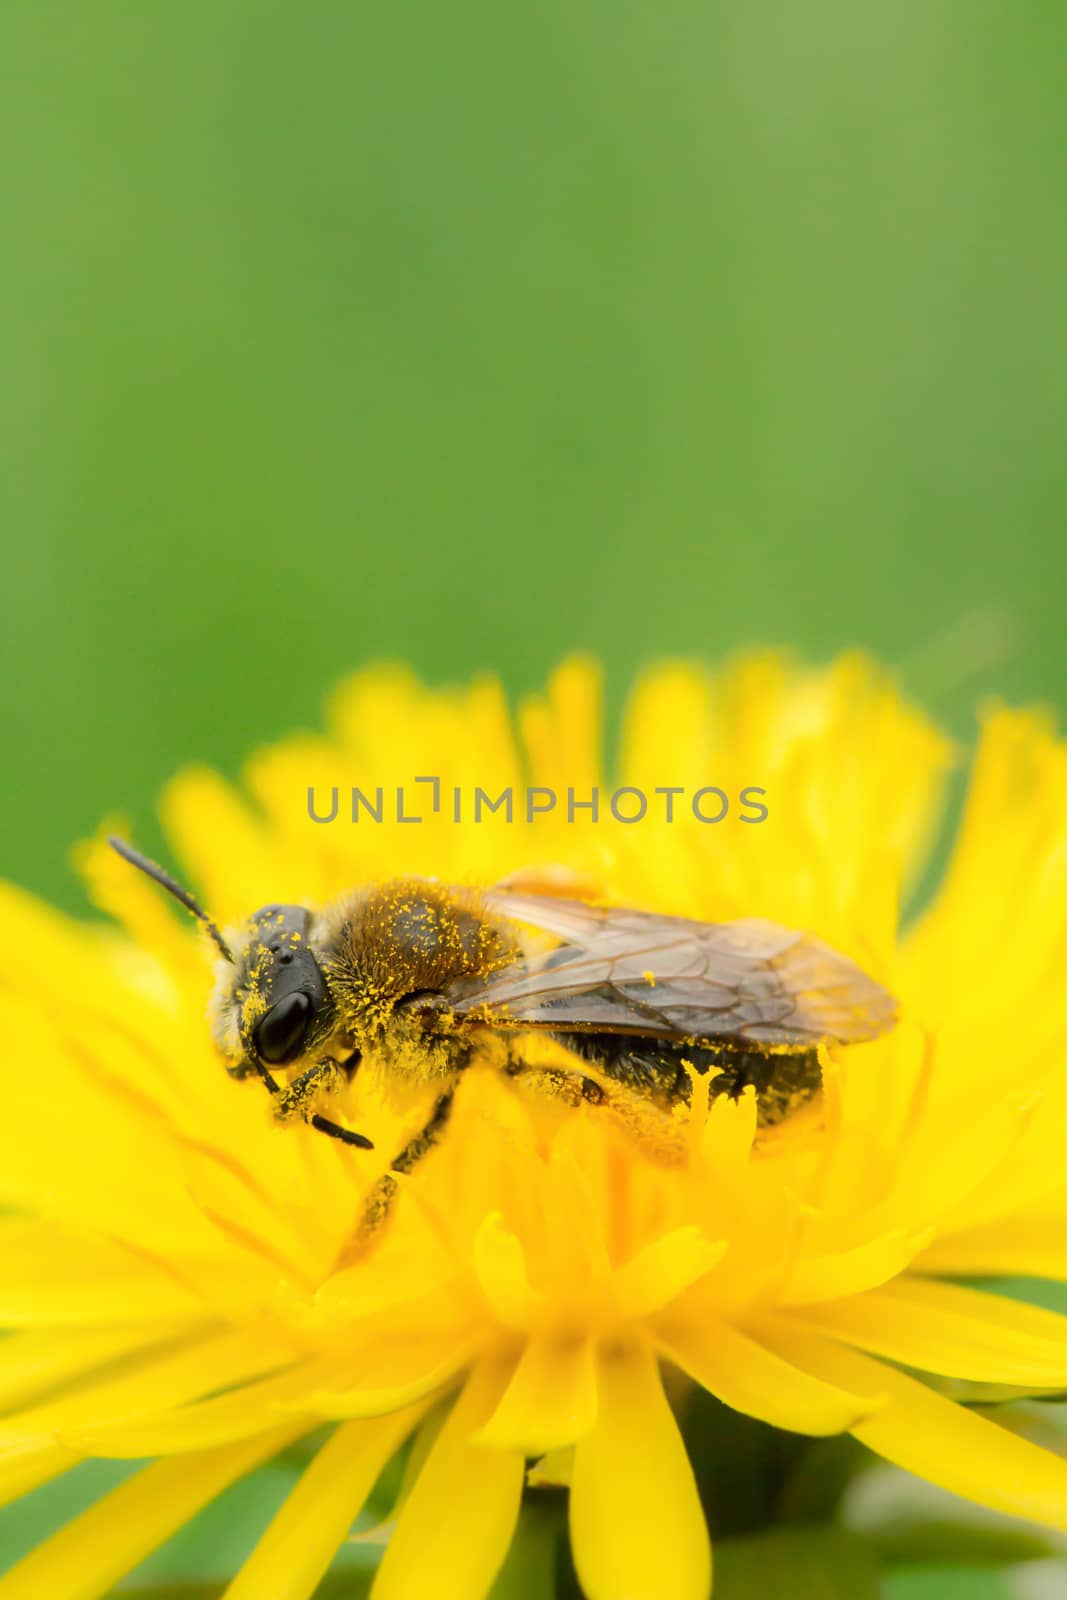 A bee full of pollen on a yellow blossom by sandra_fotodesign